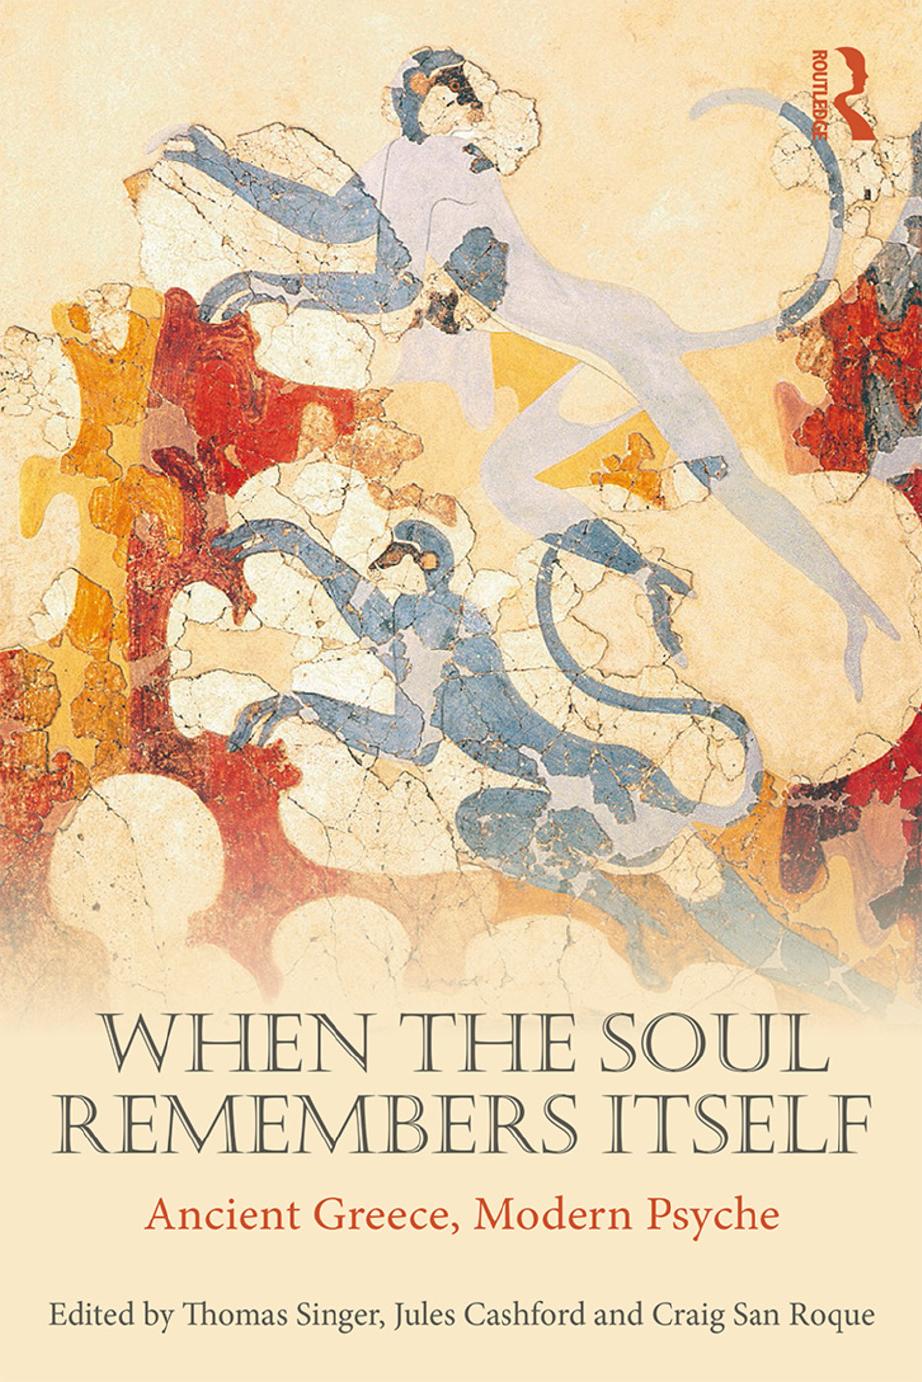 When The Soul Remembers Itself; Ancient Greece, Modern Psyche by Thomas Singer; Jules Cashford; Craig San Roque